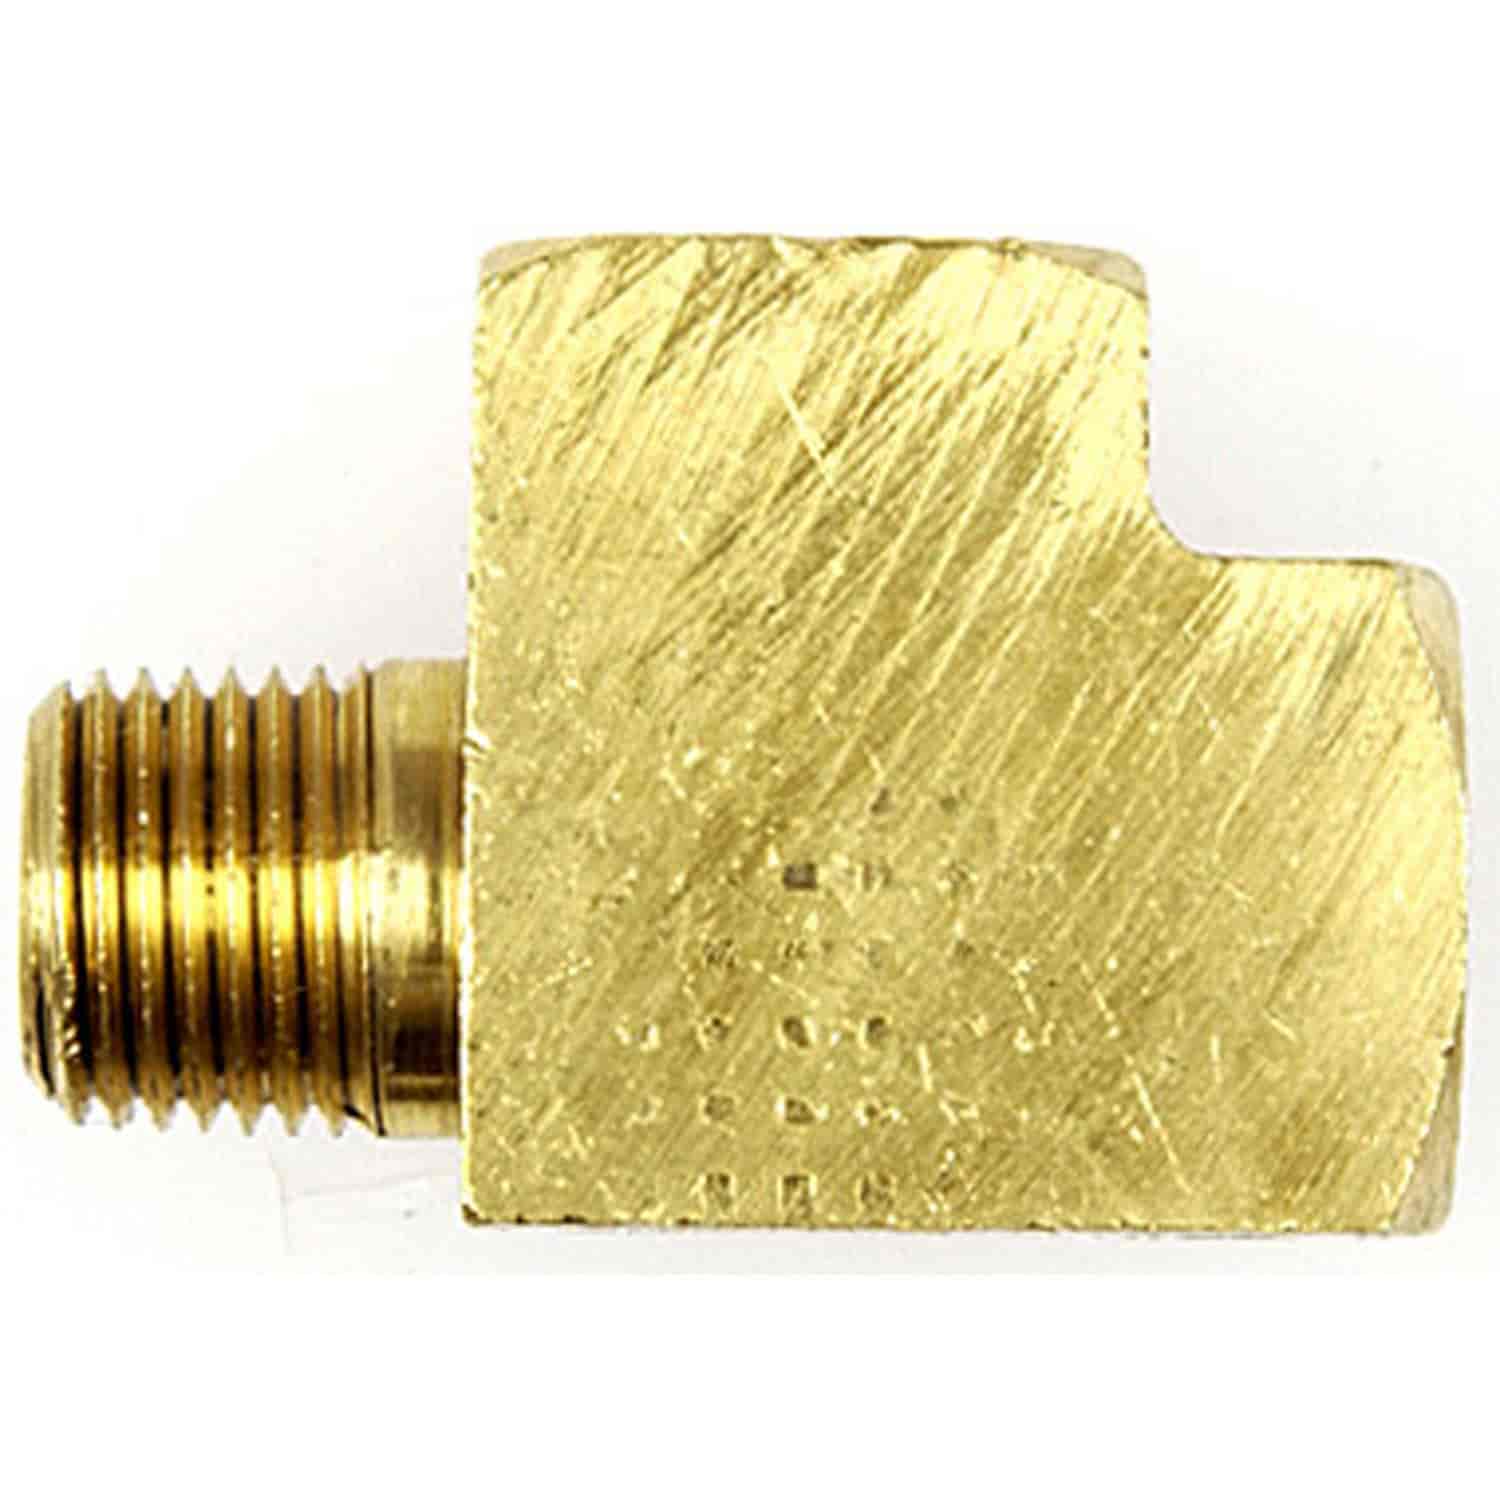 Brass Fuel Hose Tee Connector 1/8 in. Female NPT to 1/8 in. Male NPT